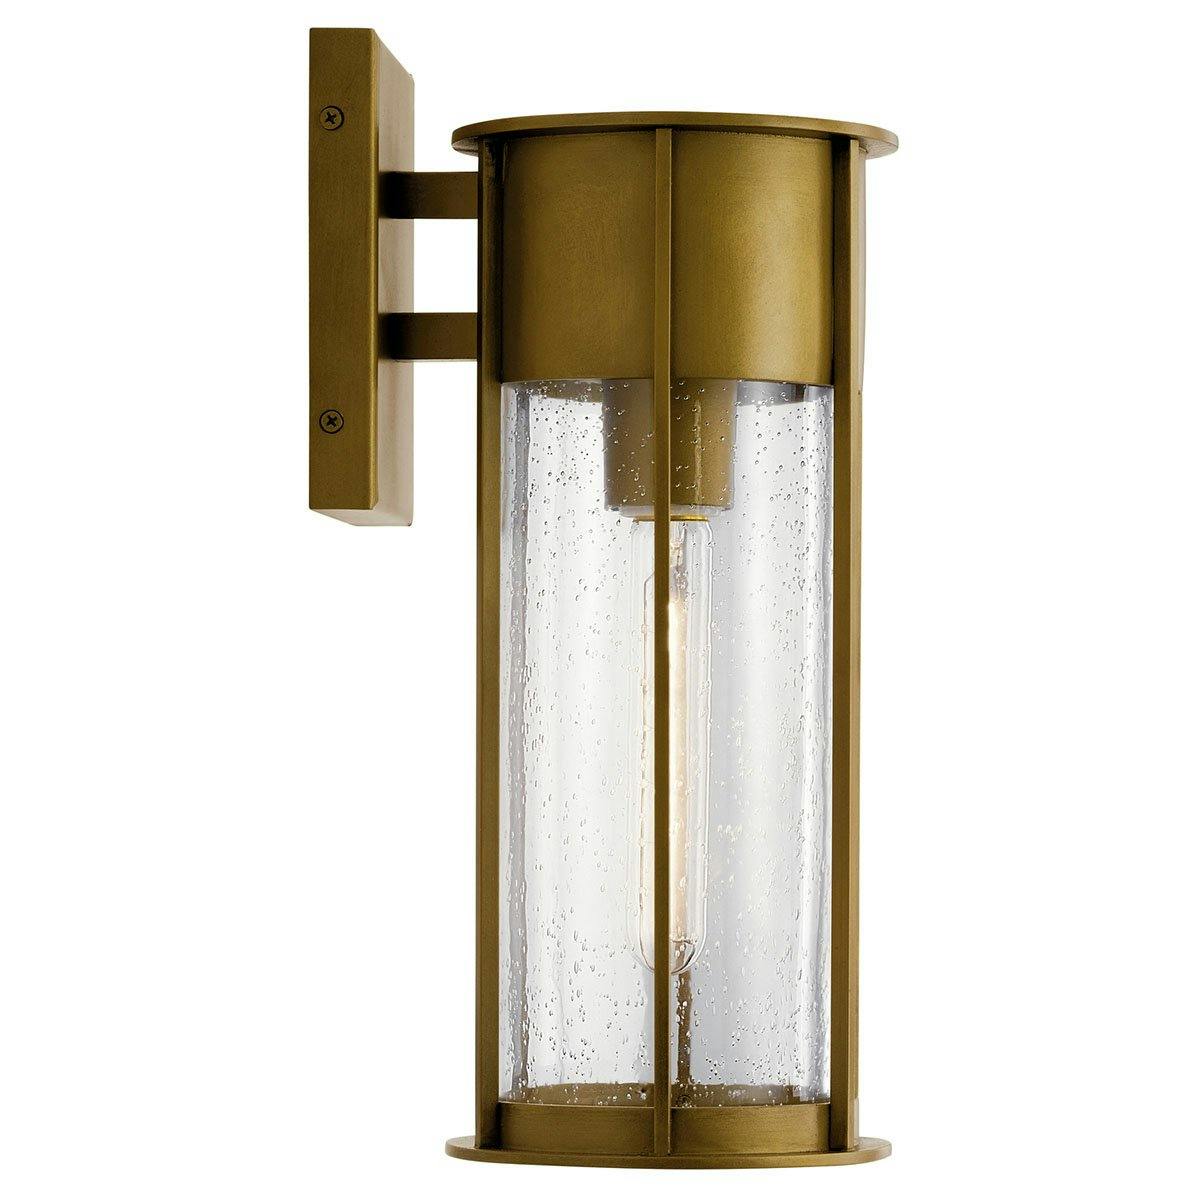 Profile view of the Camillo 15" 1 Light Wall Light Brass on a white background